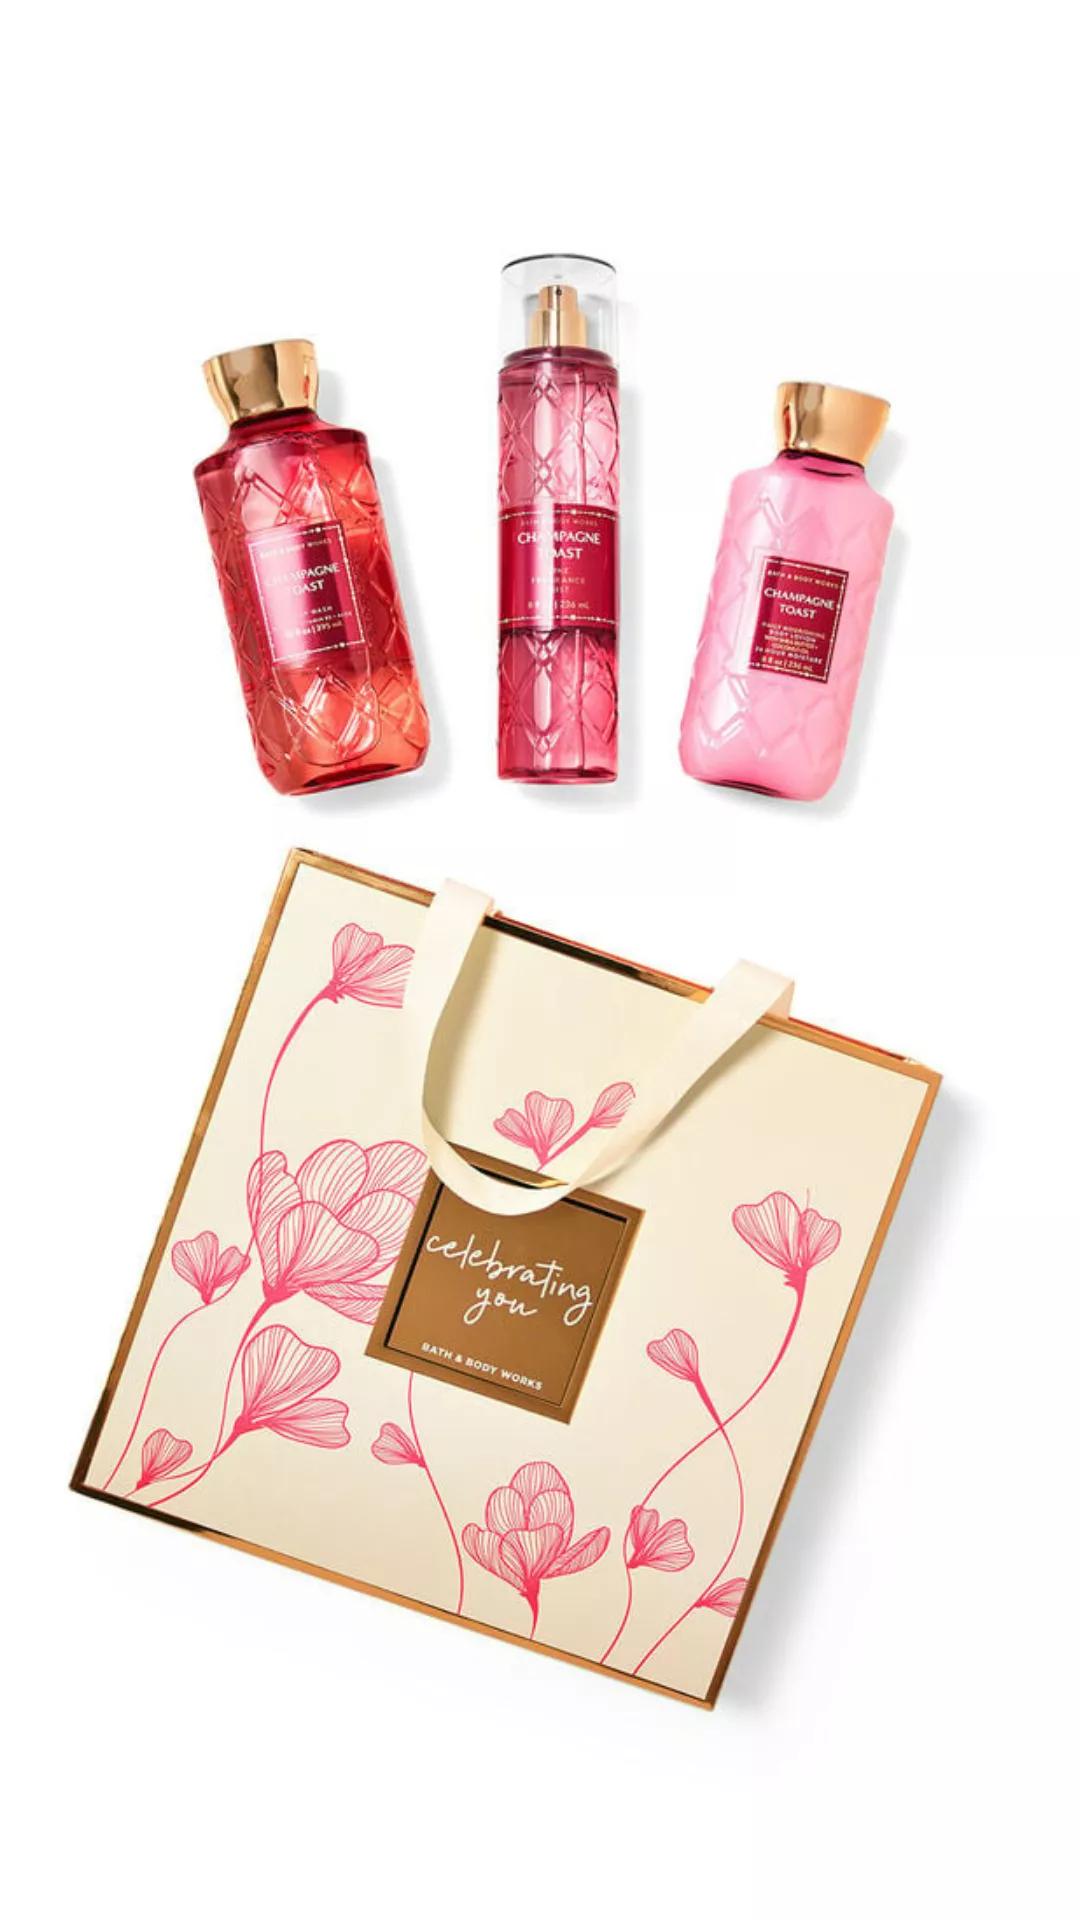 [CF SaDM] - Mother's Day Gift Guide - Bath & Body Works